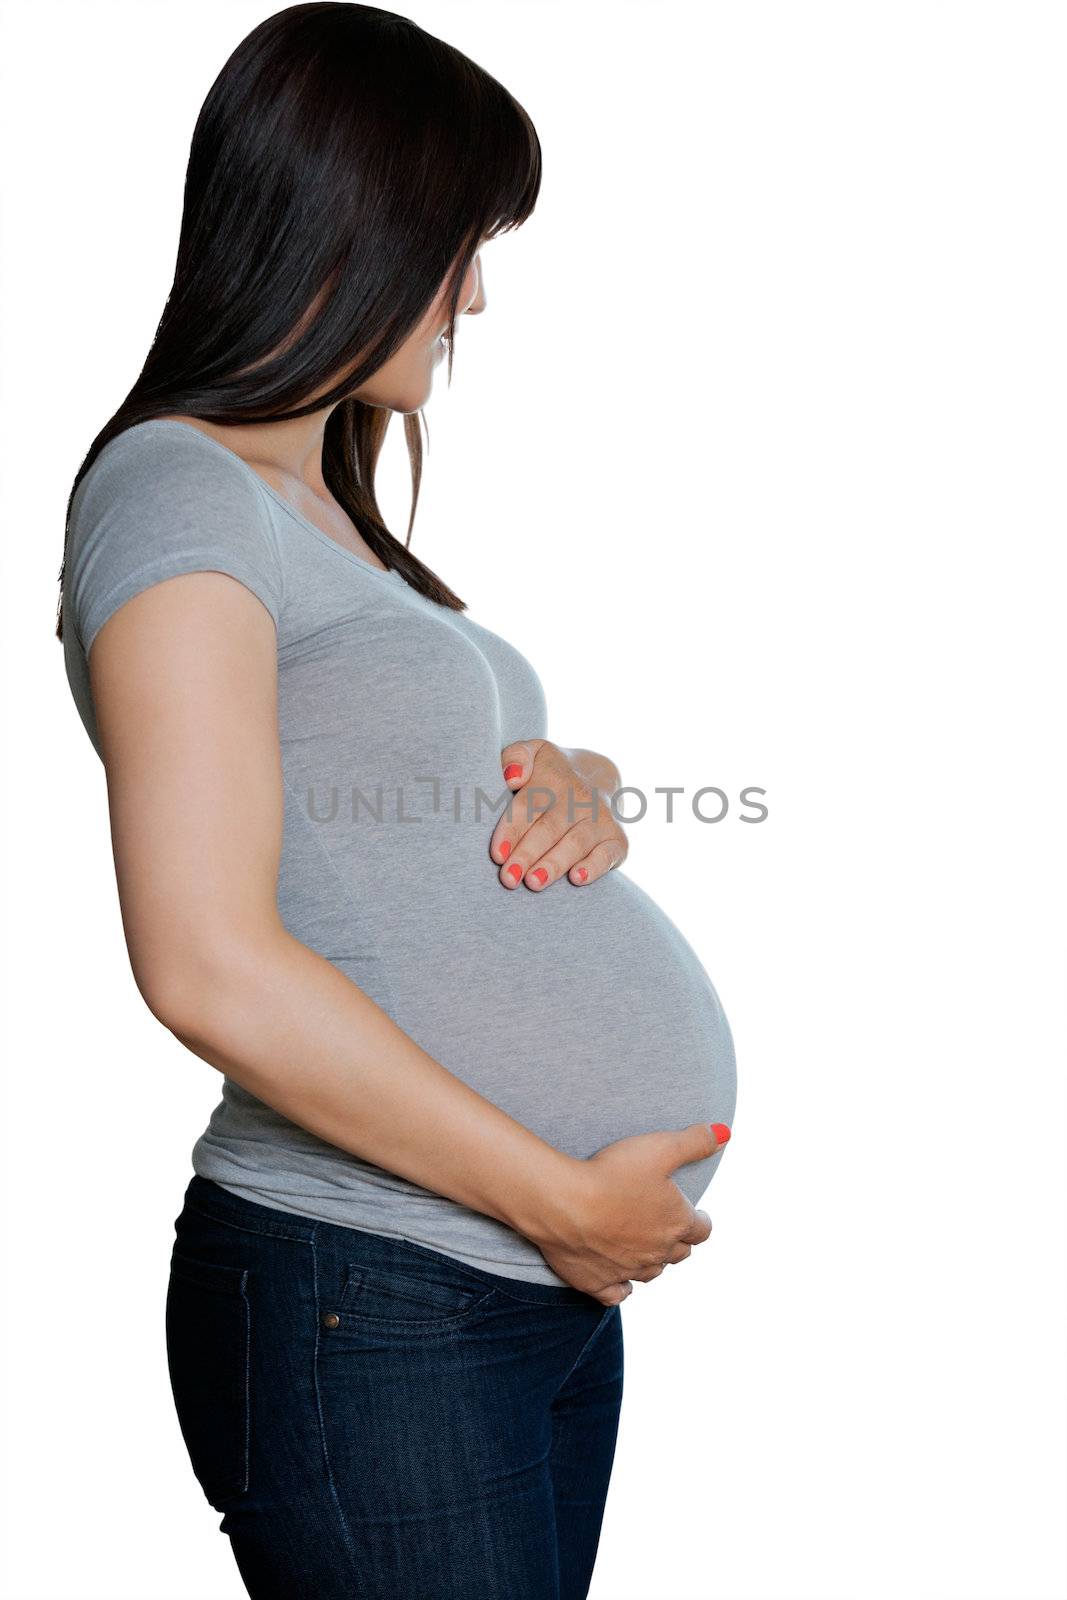 Pregnant Woman With Hands On Stomach by leaf